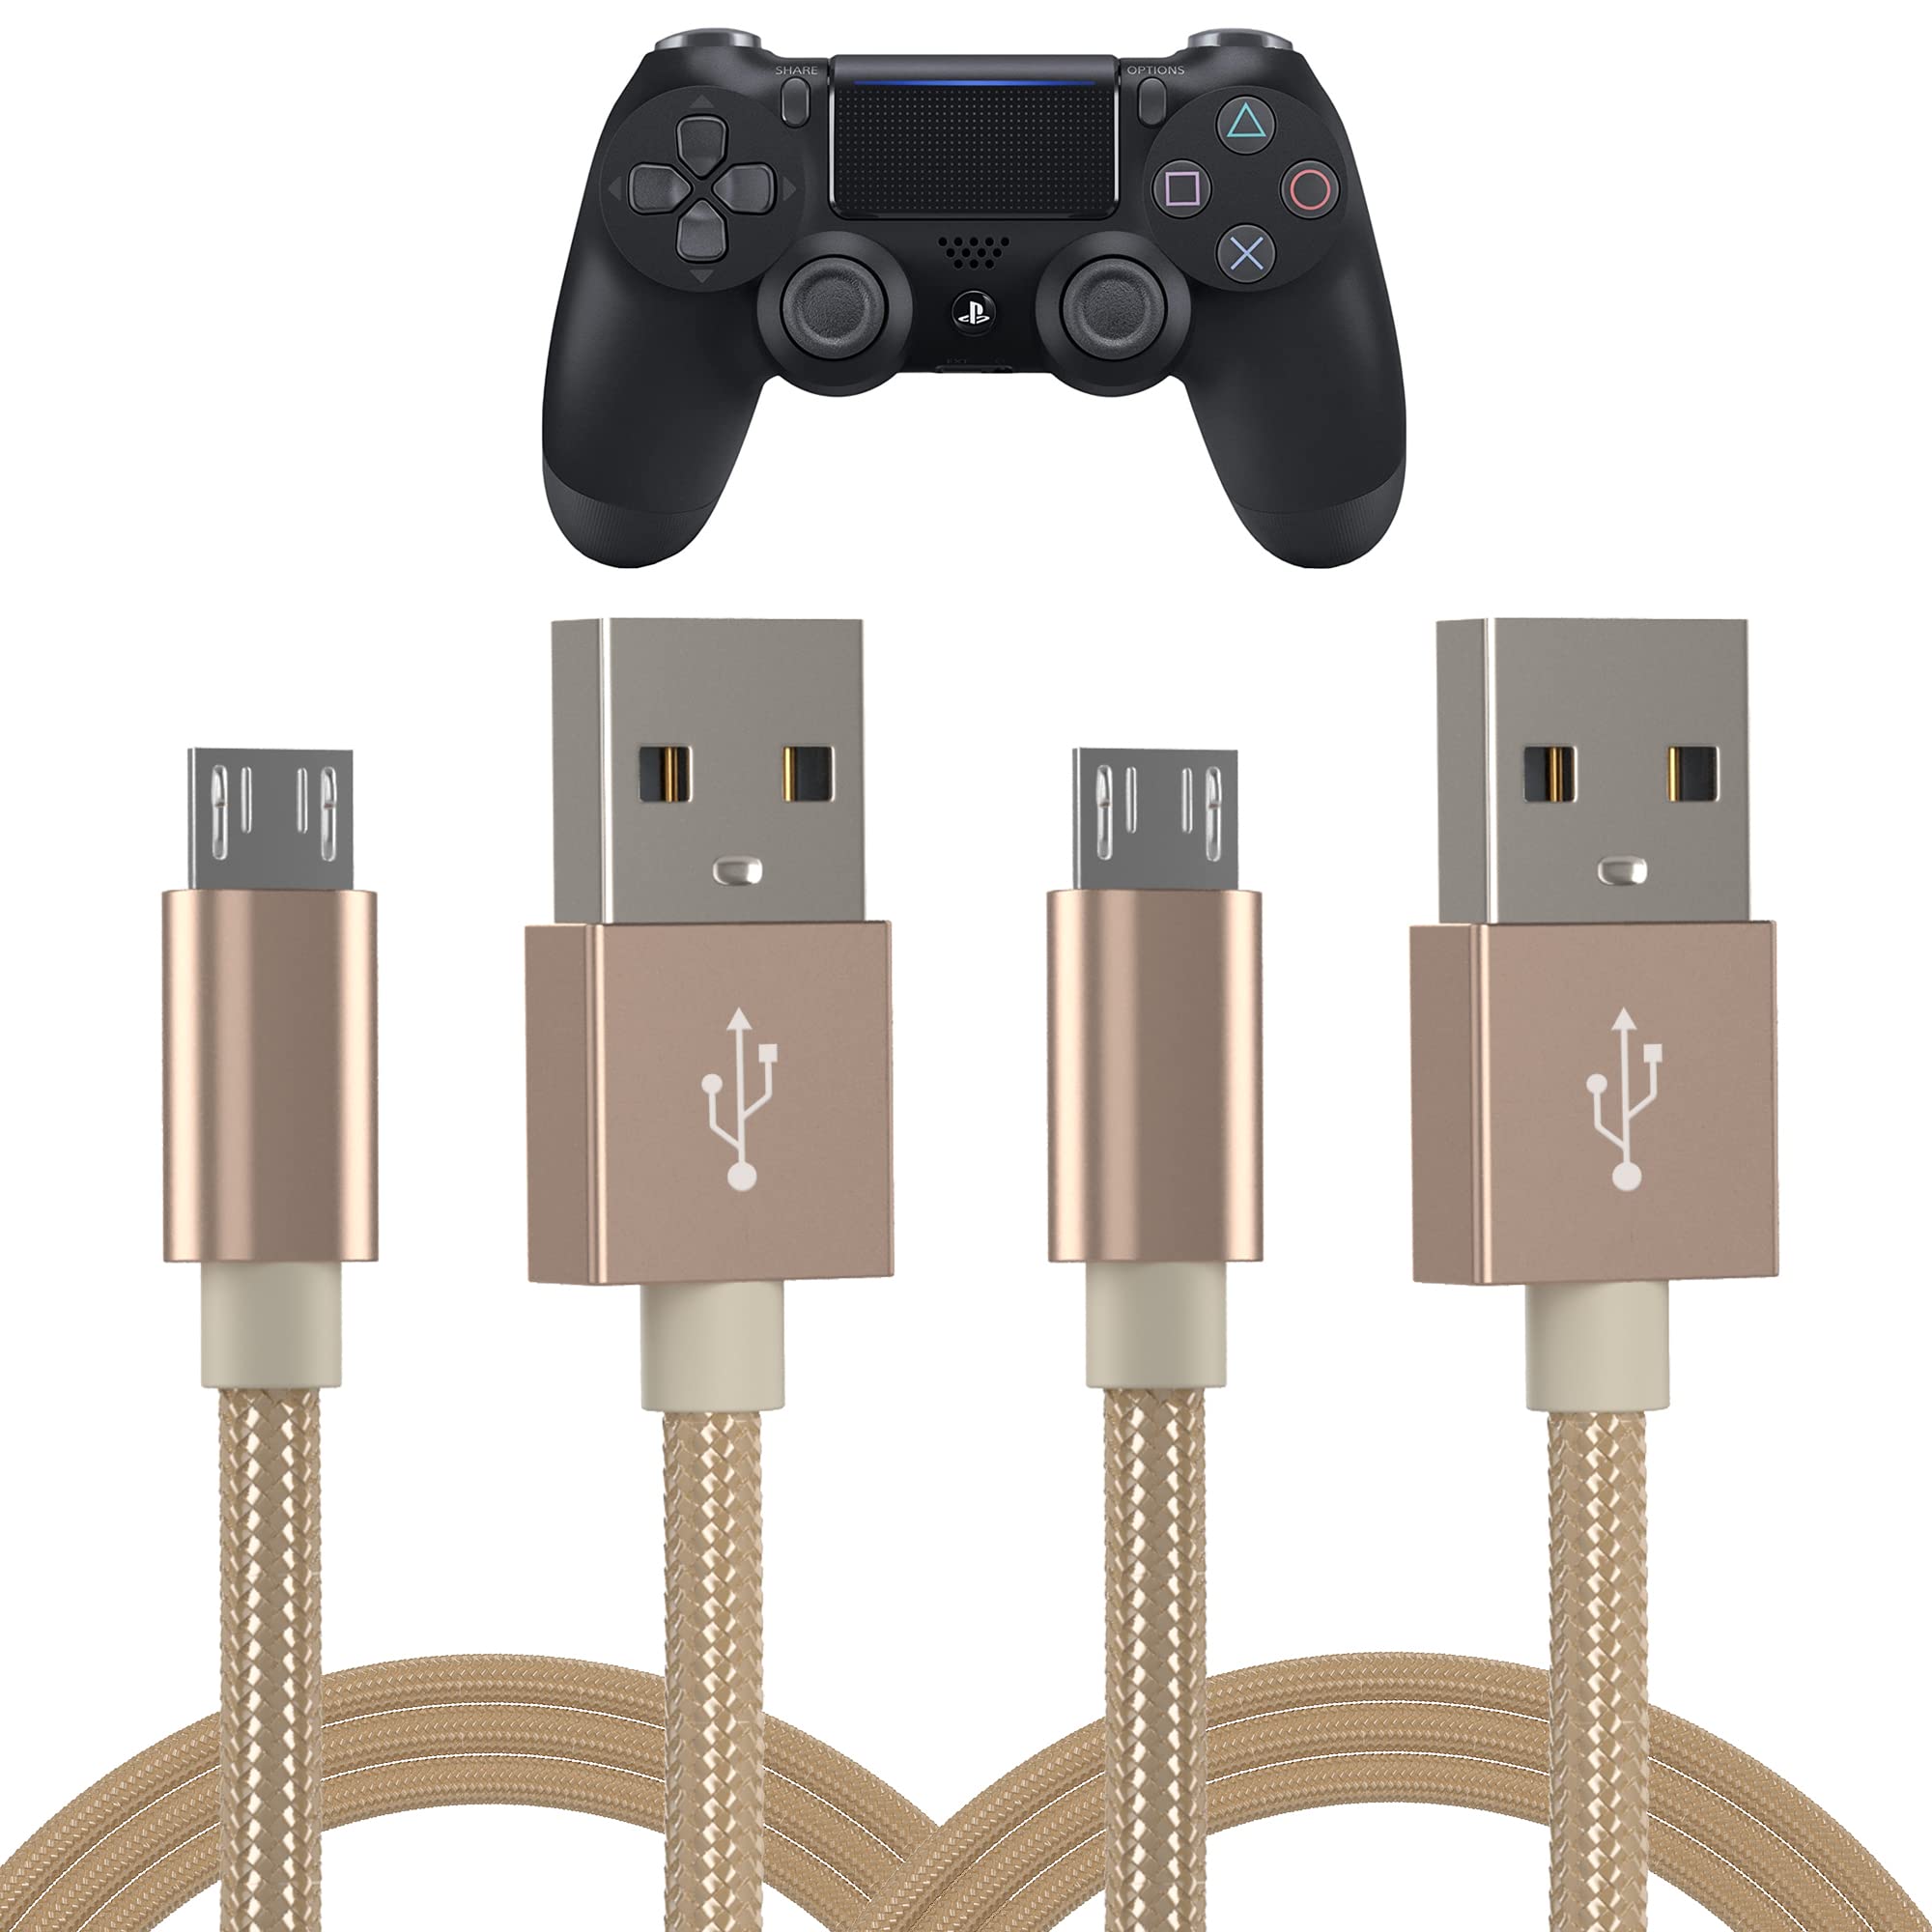 TALK WORKS Playstation 4 Charging Cable - 6' Nylon Braided Micro USB Charger Cord, Heavy Duty Fast Charge for PS4 (Gold, Pack of 2) (14092)